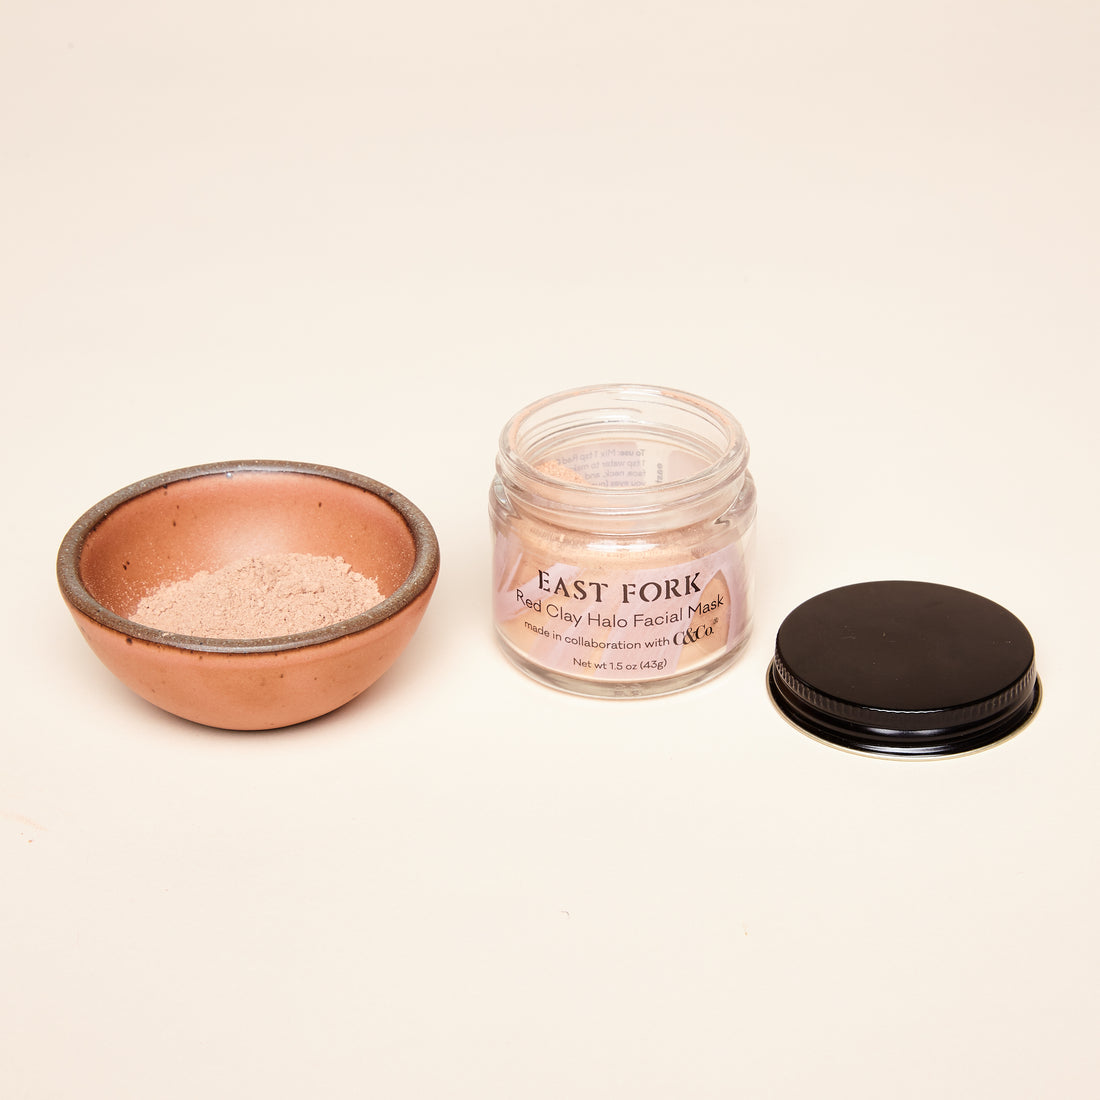 Red Clay Halo Mask